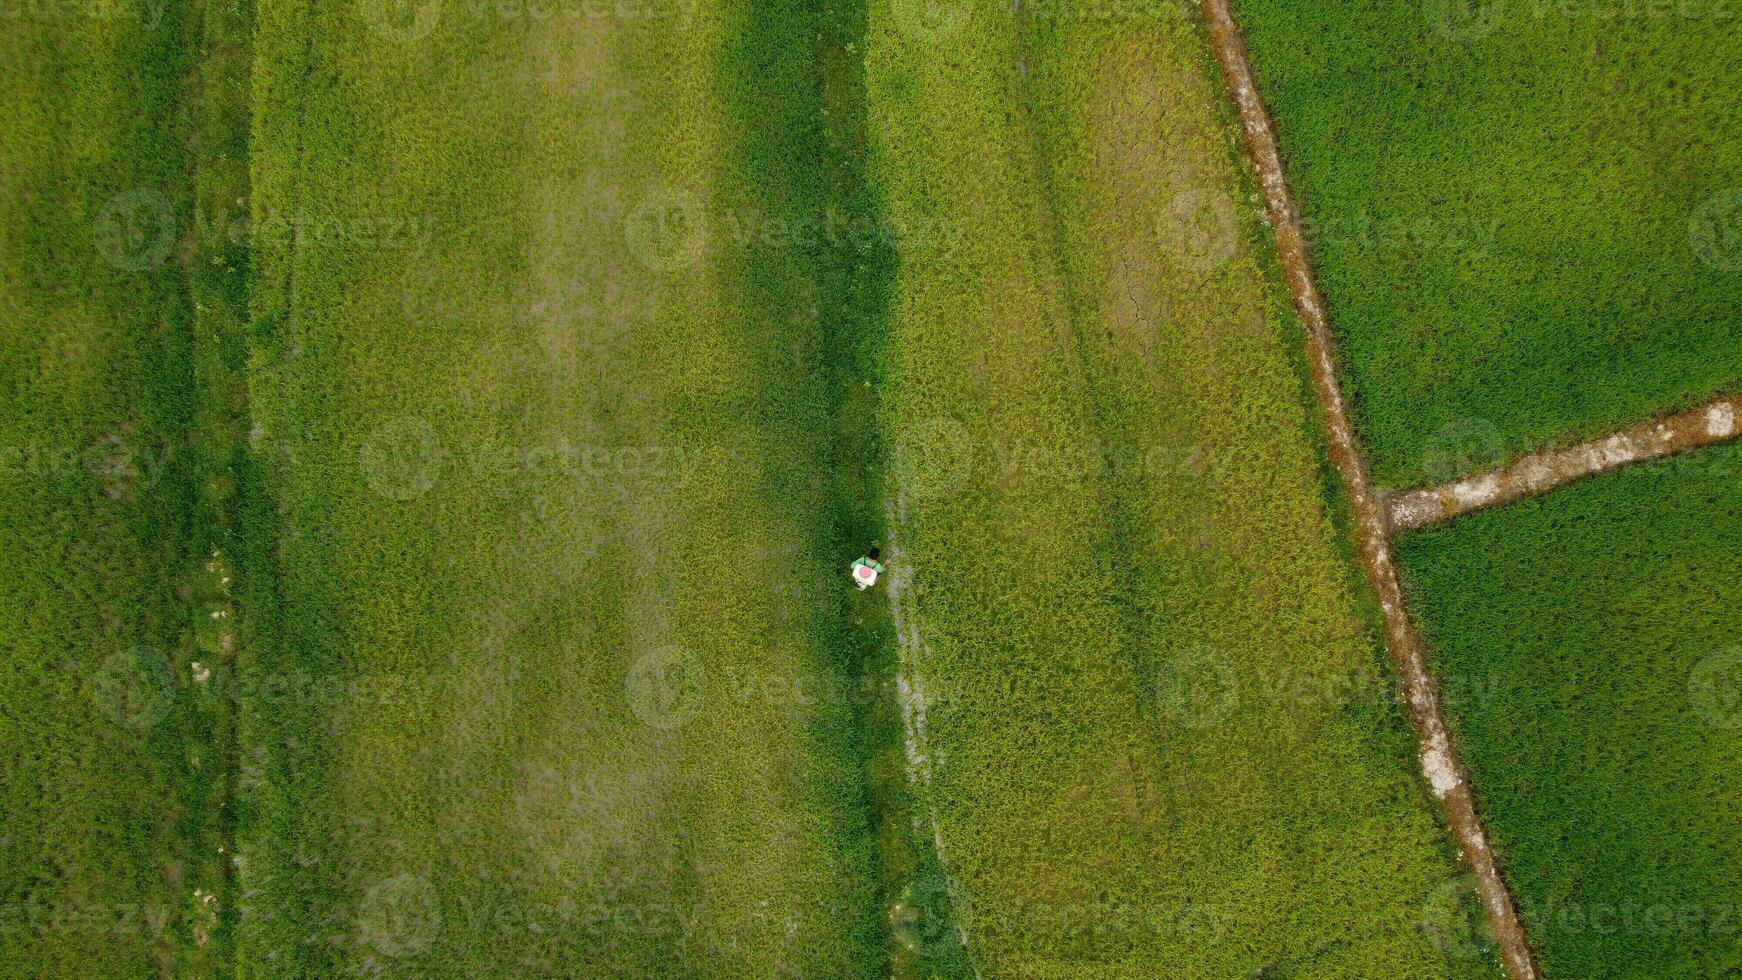 Aerial view of farmer spraying green rice plants with fertilizer. Asian farmer spraying pesticides in rice fields. Agricultural landscape photo